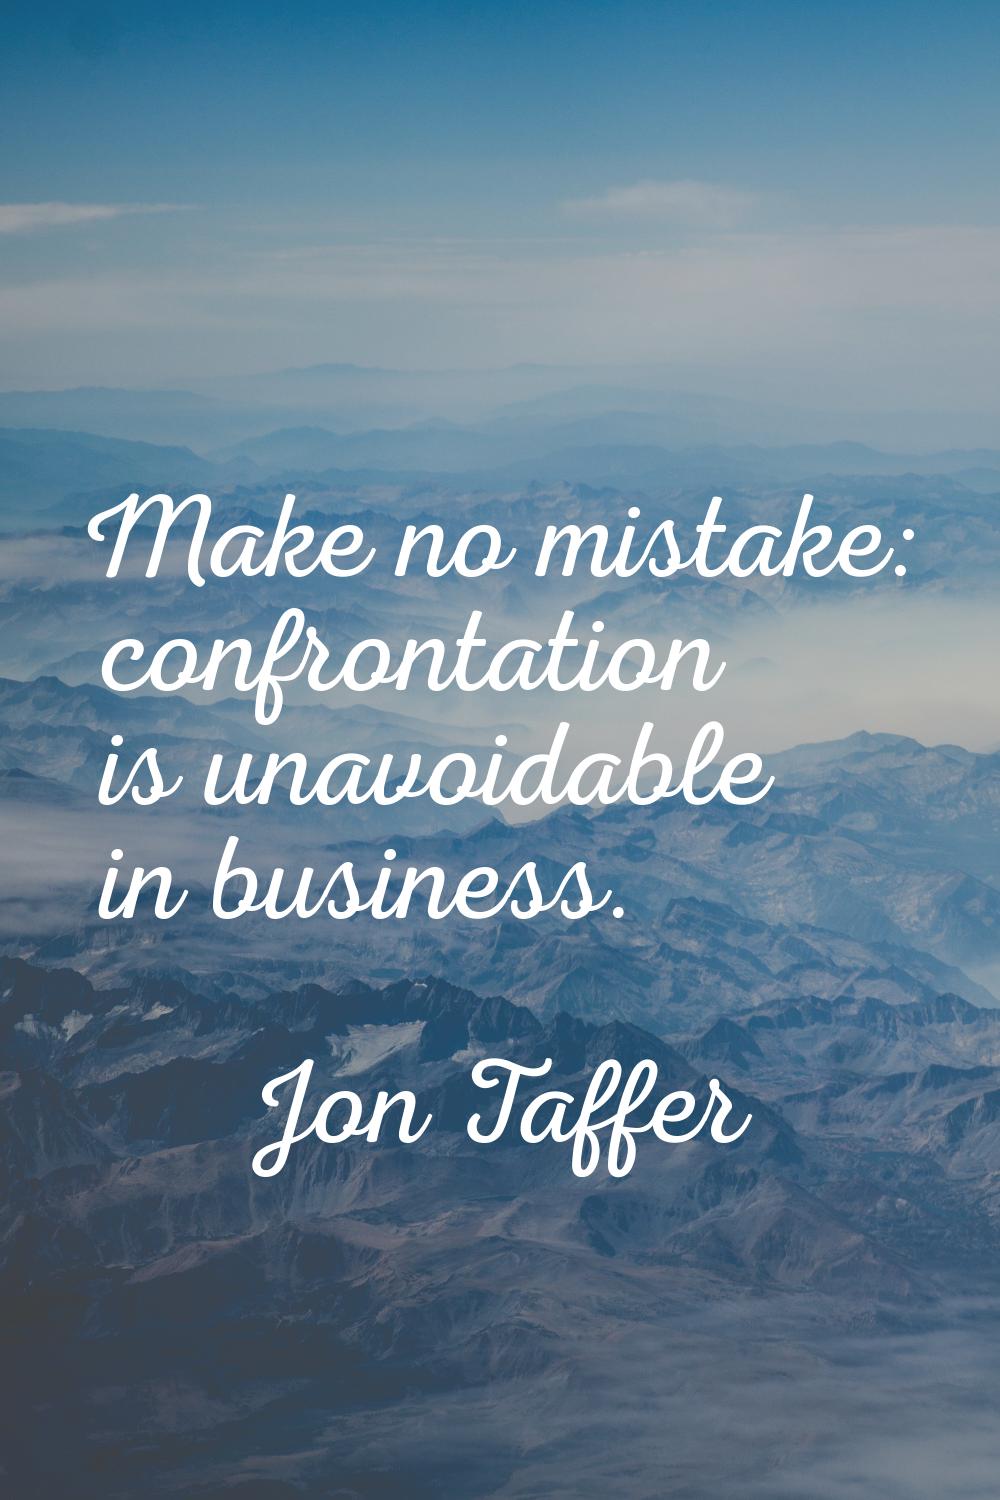 Make no mistake: confrontation is unavoidable in business.